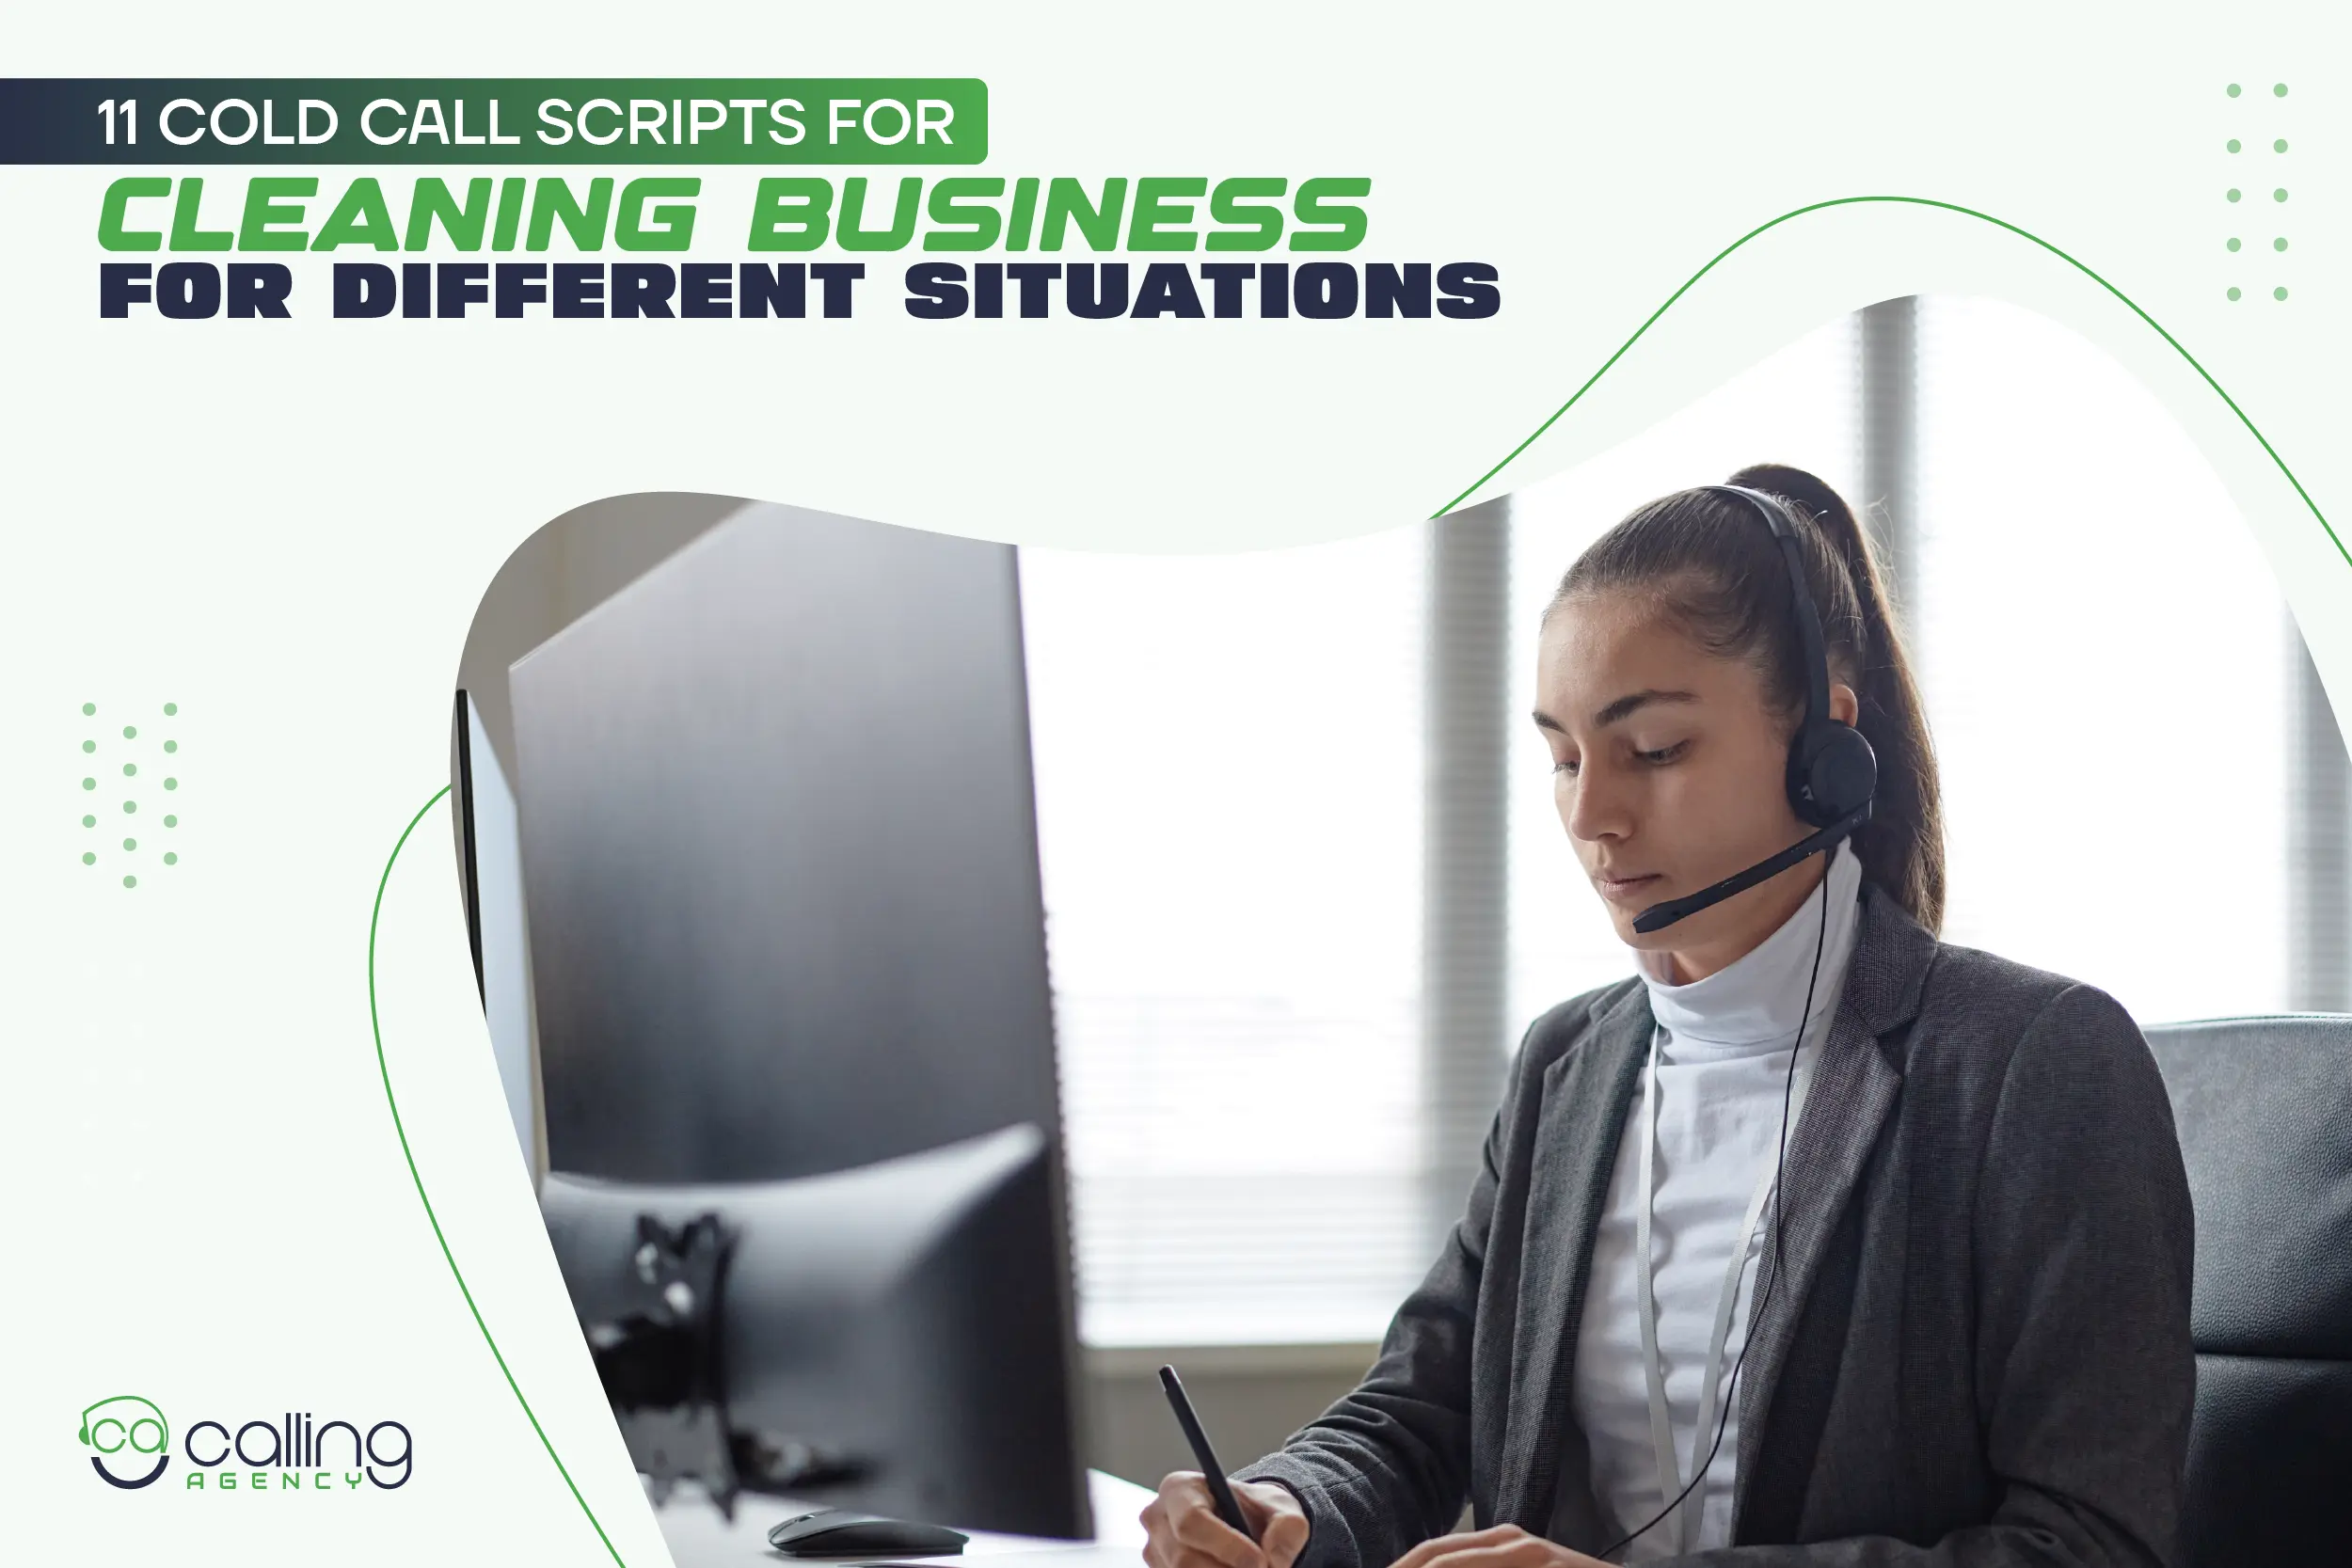 11 Cold Call Scripts for Cleaning Business for Different Situations